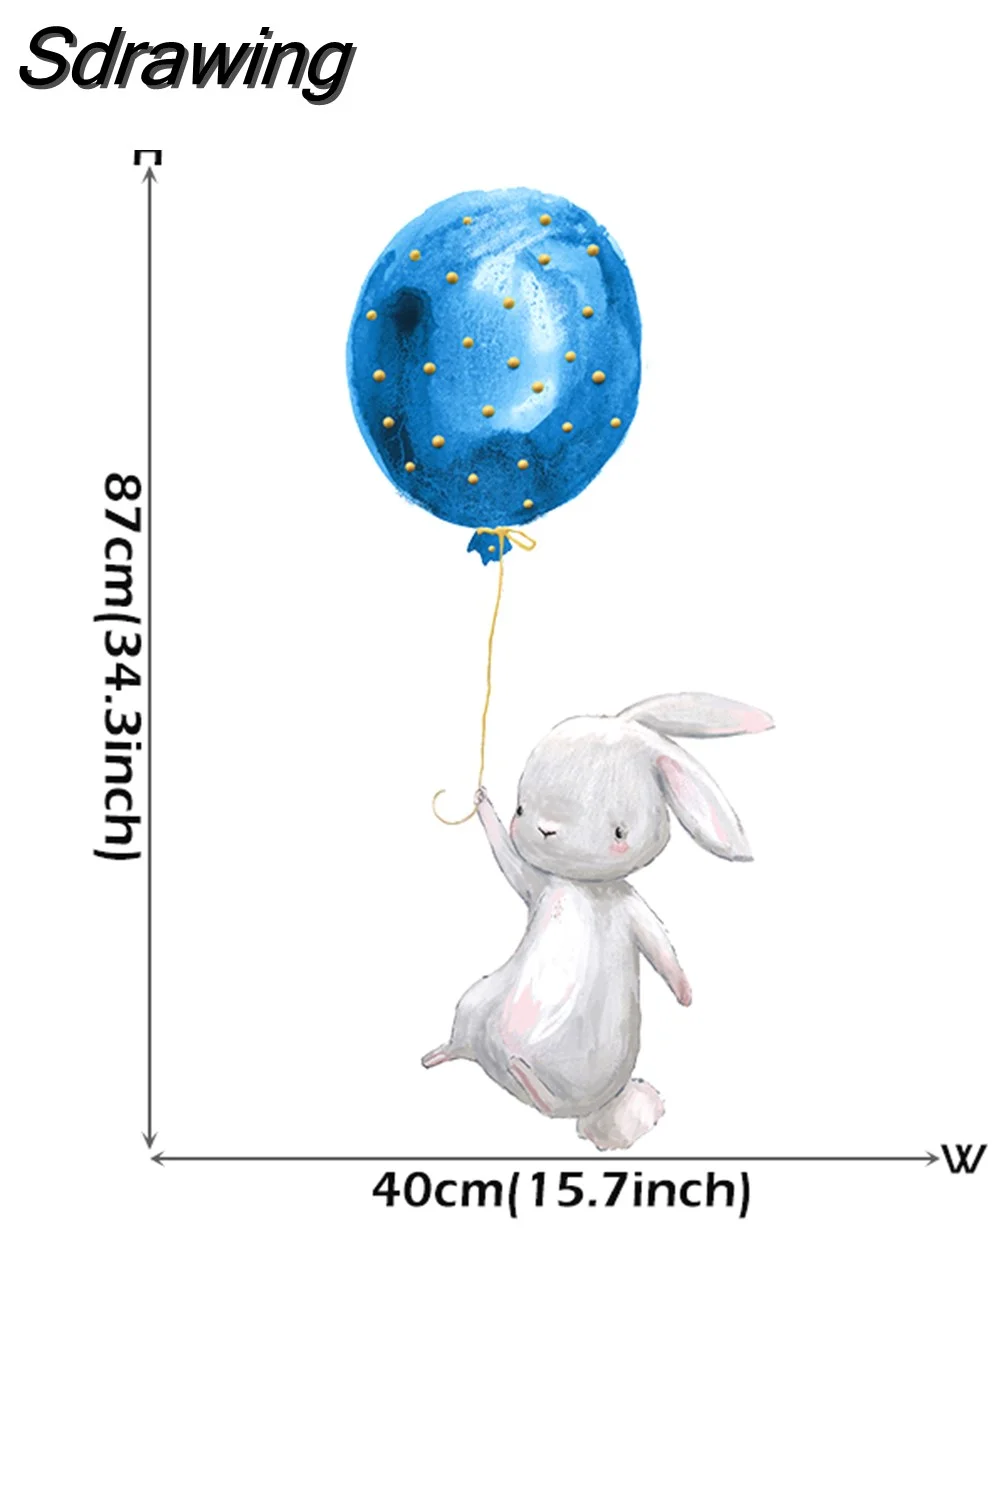 Sdrawing Color Boy Bunny with Air Balloons Wall Stickers for Kids Room Boy's Bedroom Decoration Wall Decals Watercolor Stars Cloud